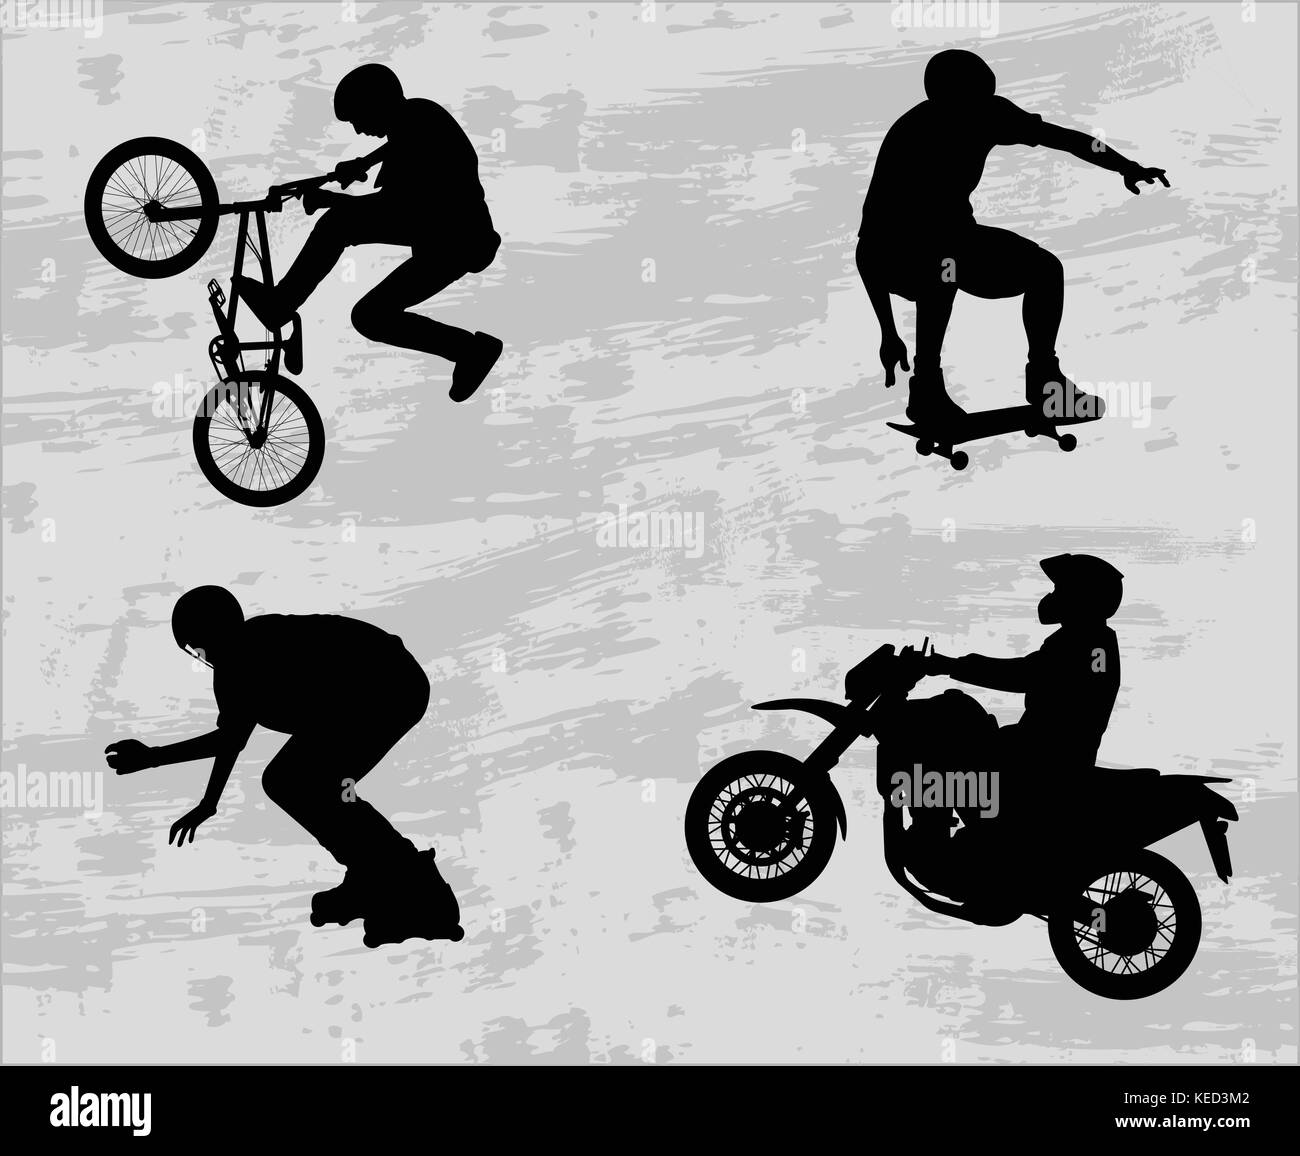 extreme sport silhouettes - vector Stock Vector